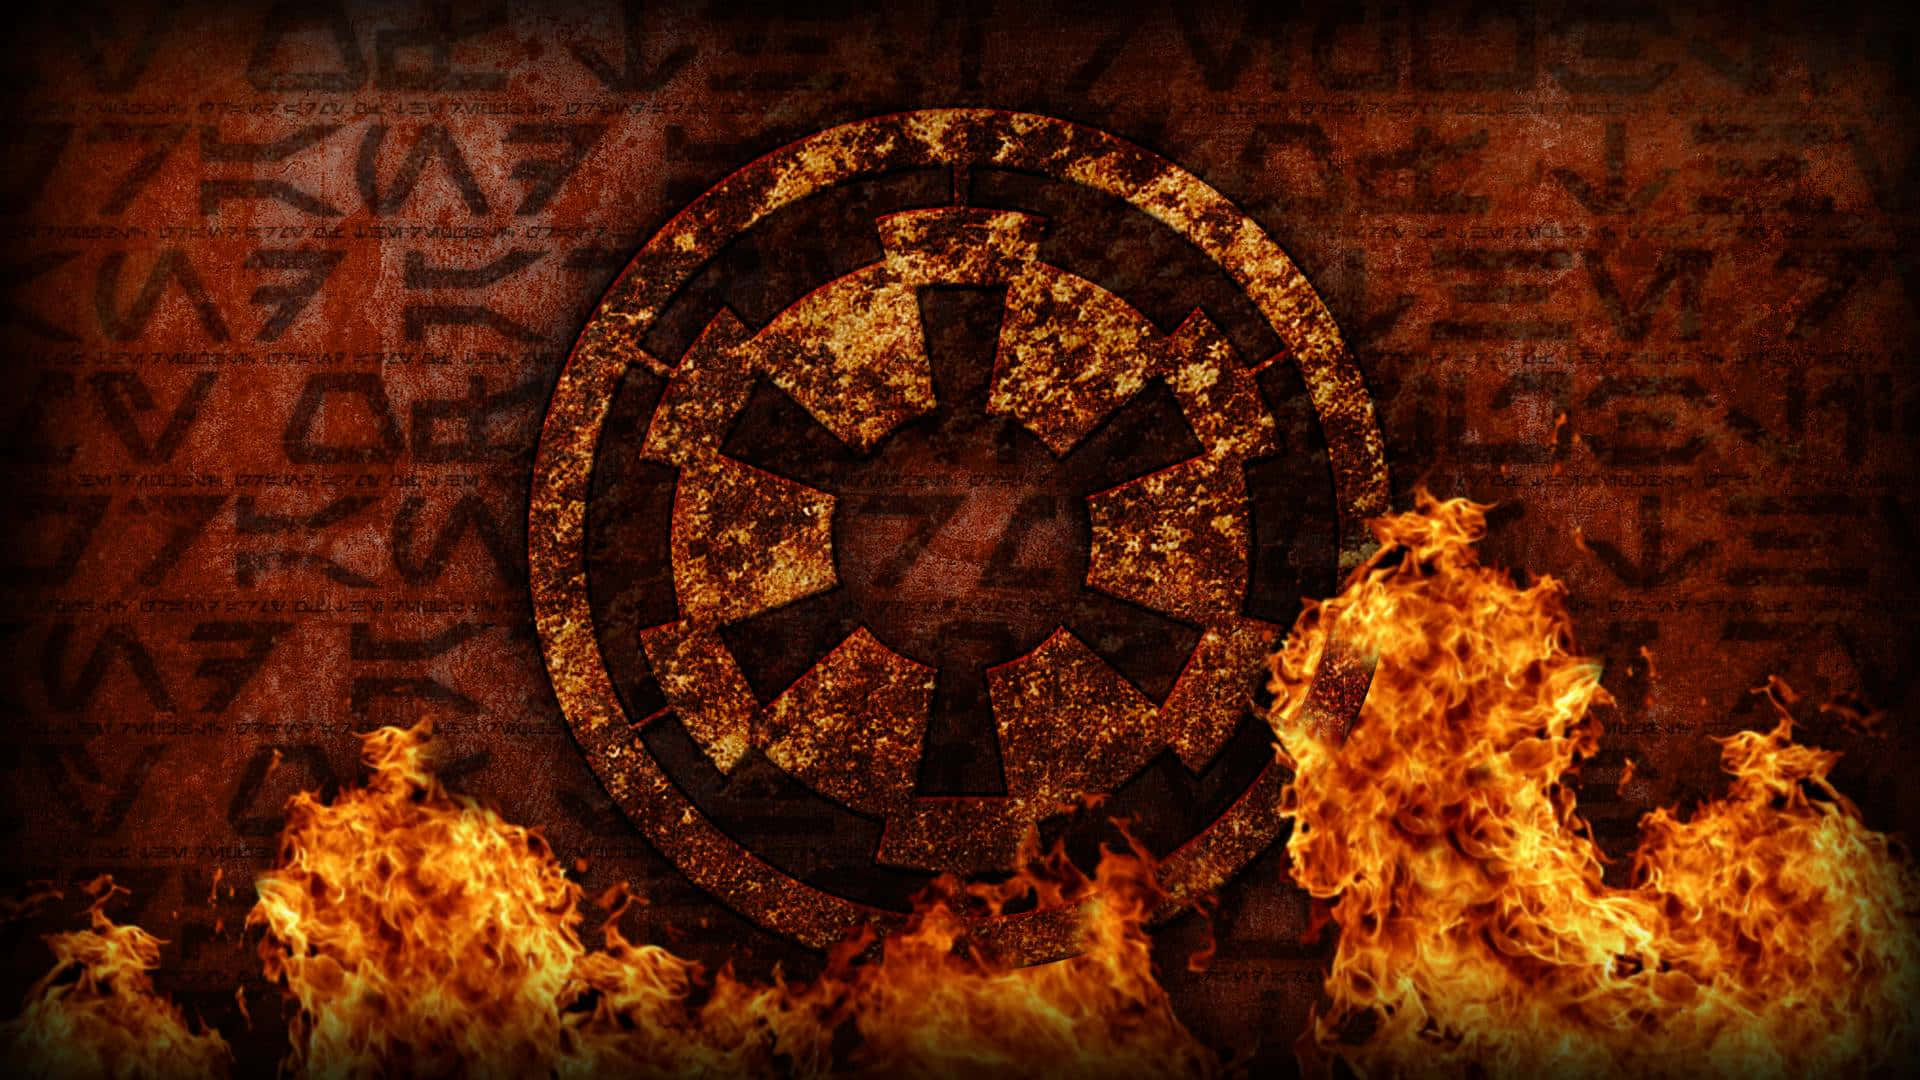 The Official Logo of the Empire from Star Wars Wallpaper